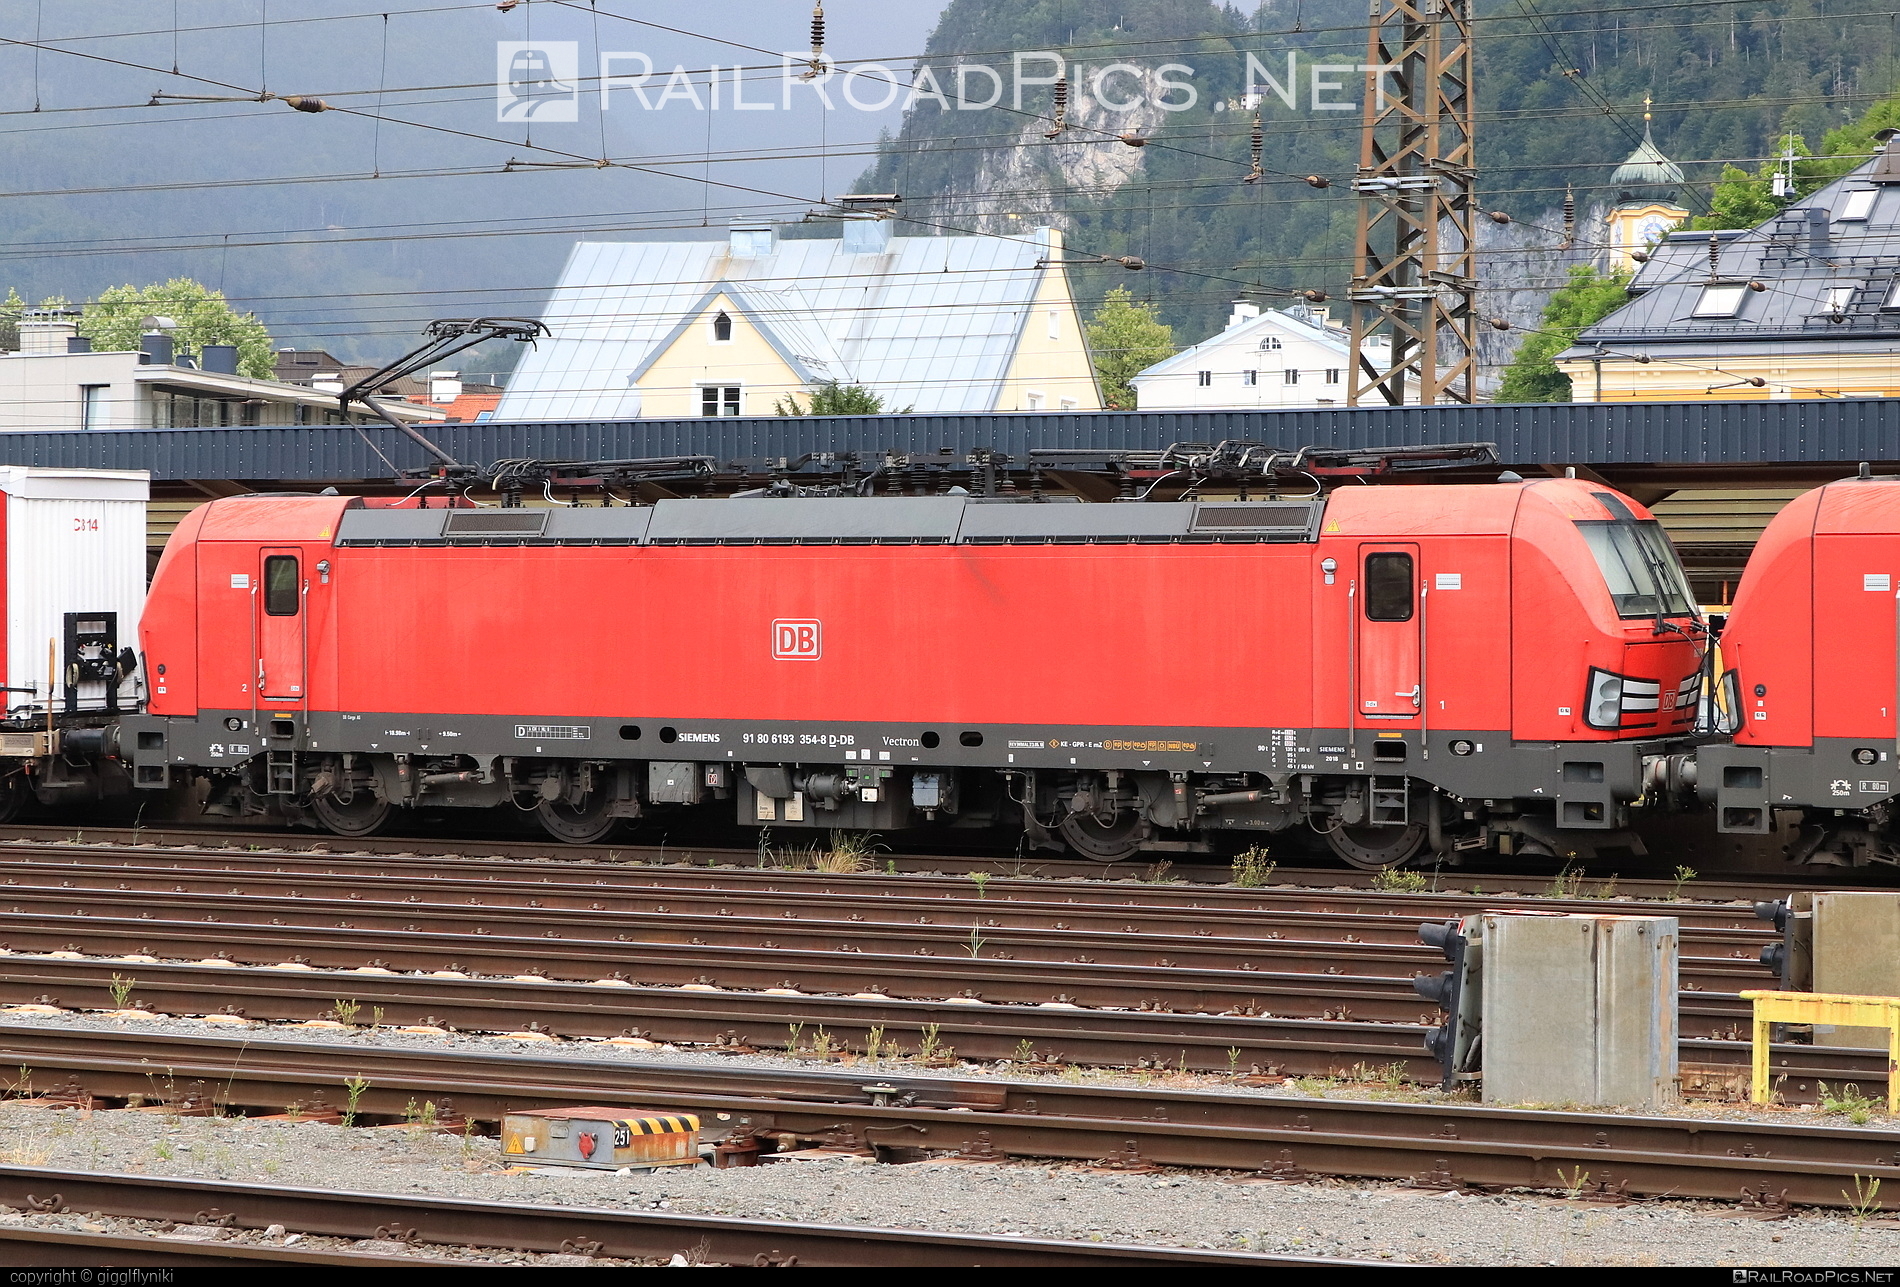 Siemens Vectron MS - 193 354 operated by DB Cargo AG #db #dbcargo #dbcargoag #deutschebahn #siemens #siemensVectron #siemensVectronMS #vectron #vectronMS